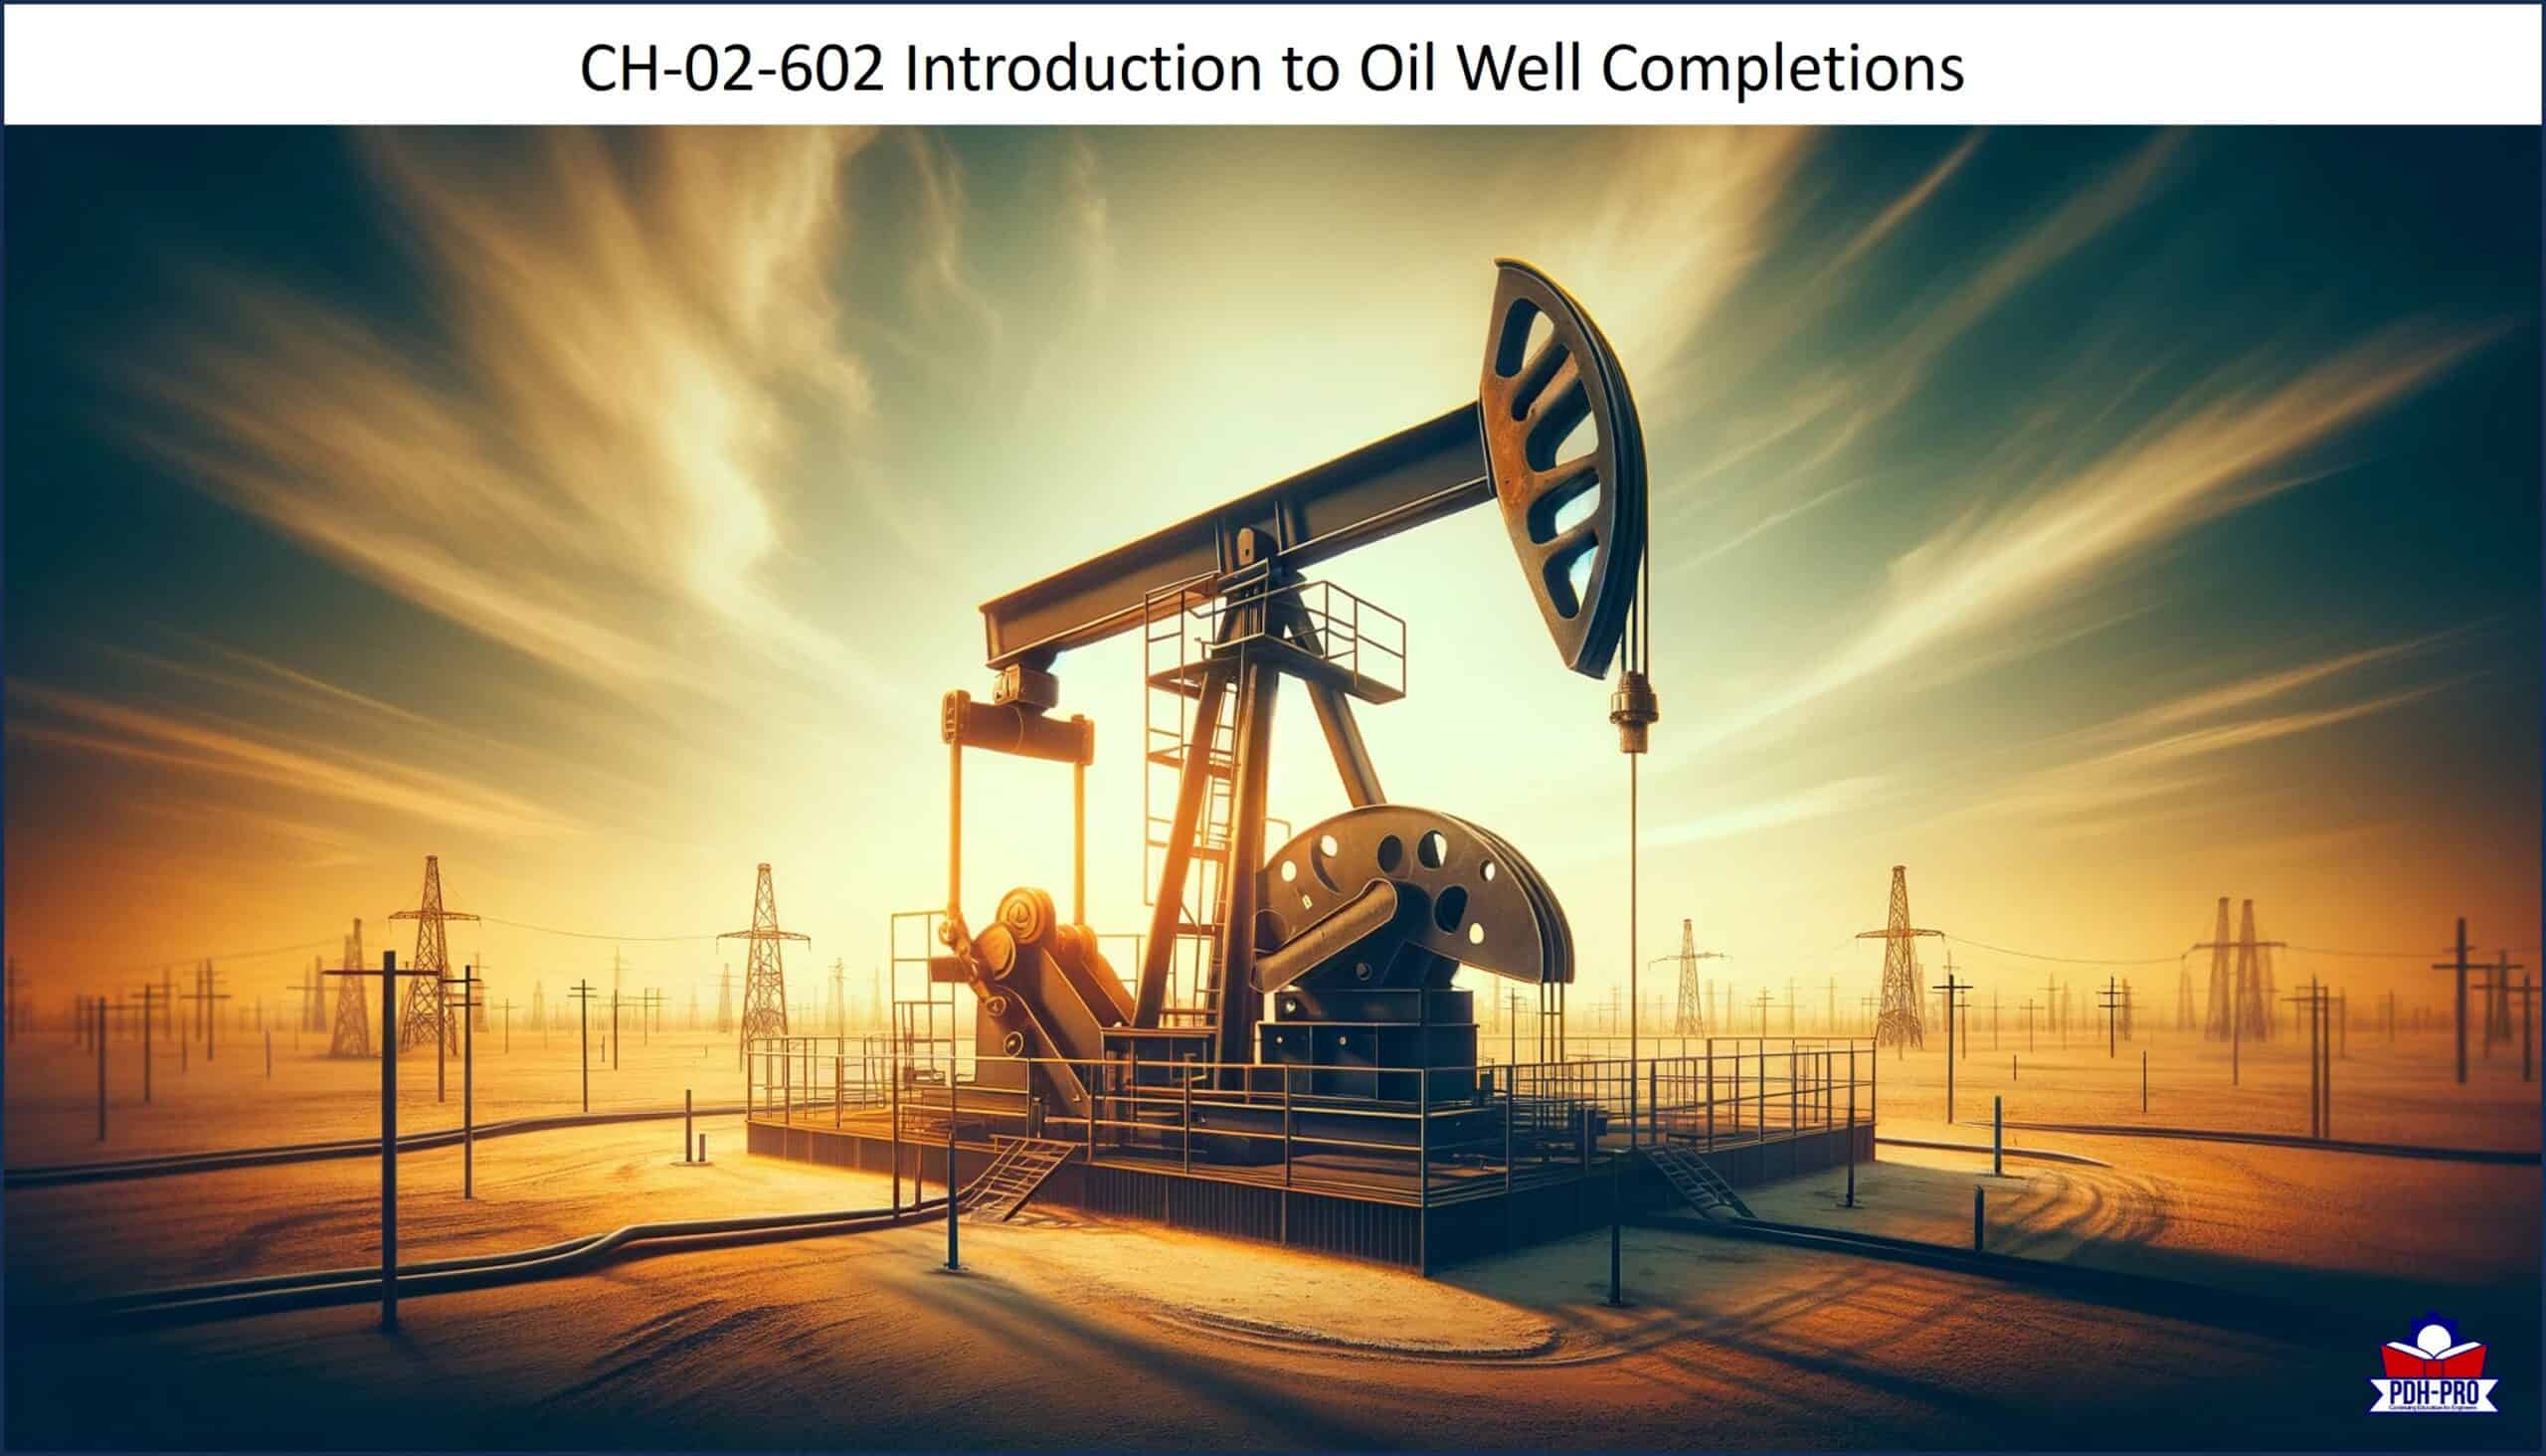 Introduction to Oil Well Completions